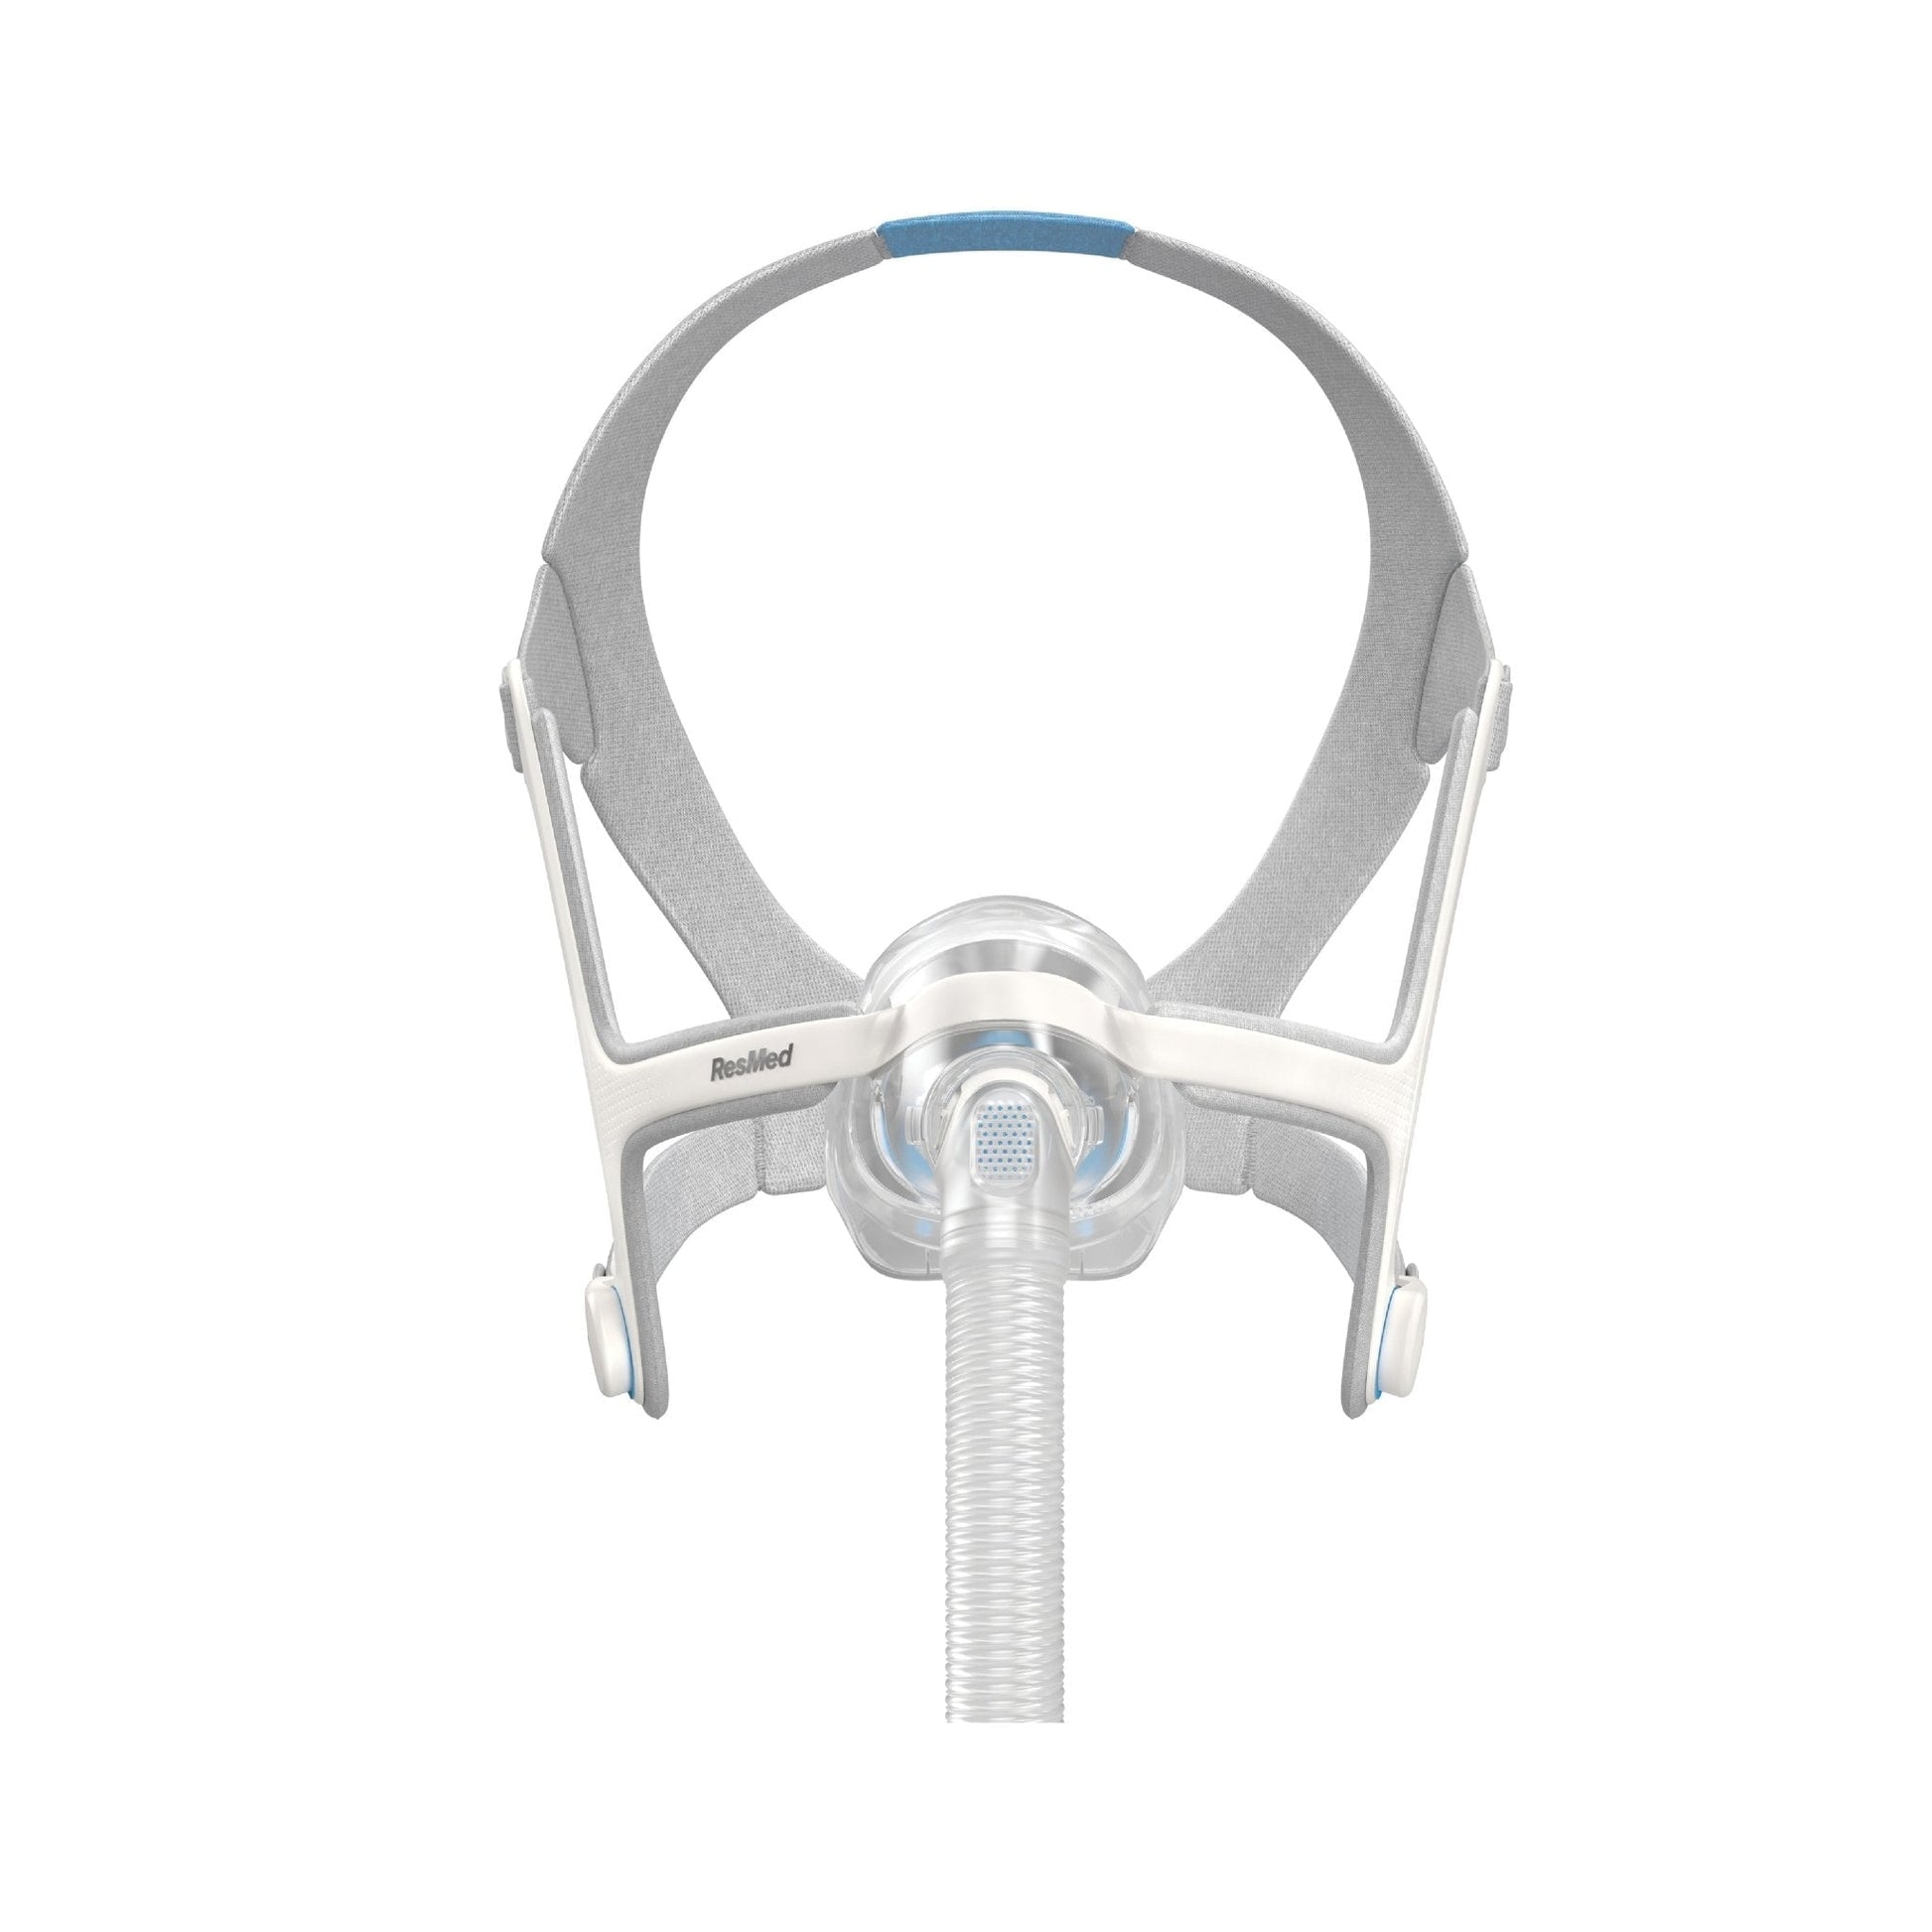 ResMed AirTouch N20 Nasal CPAP Mask - resplabsResMed